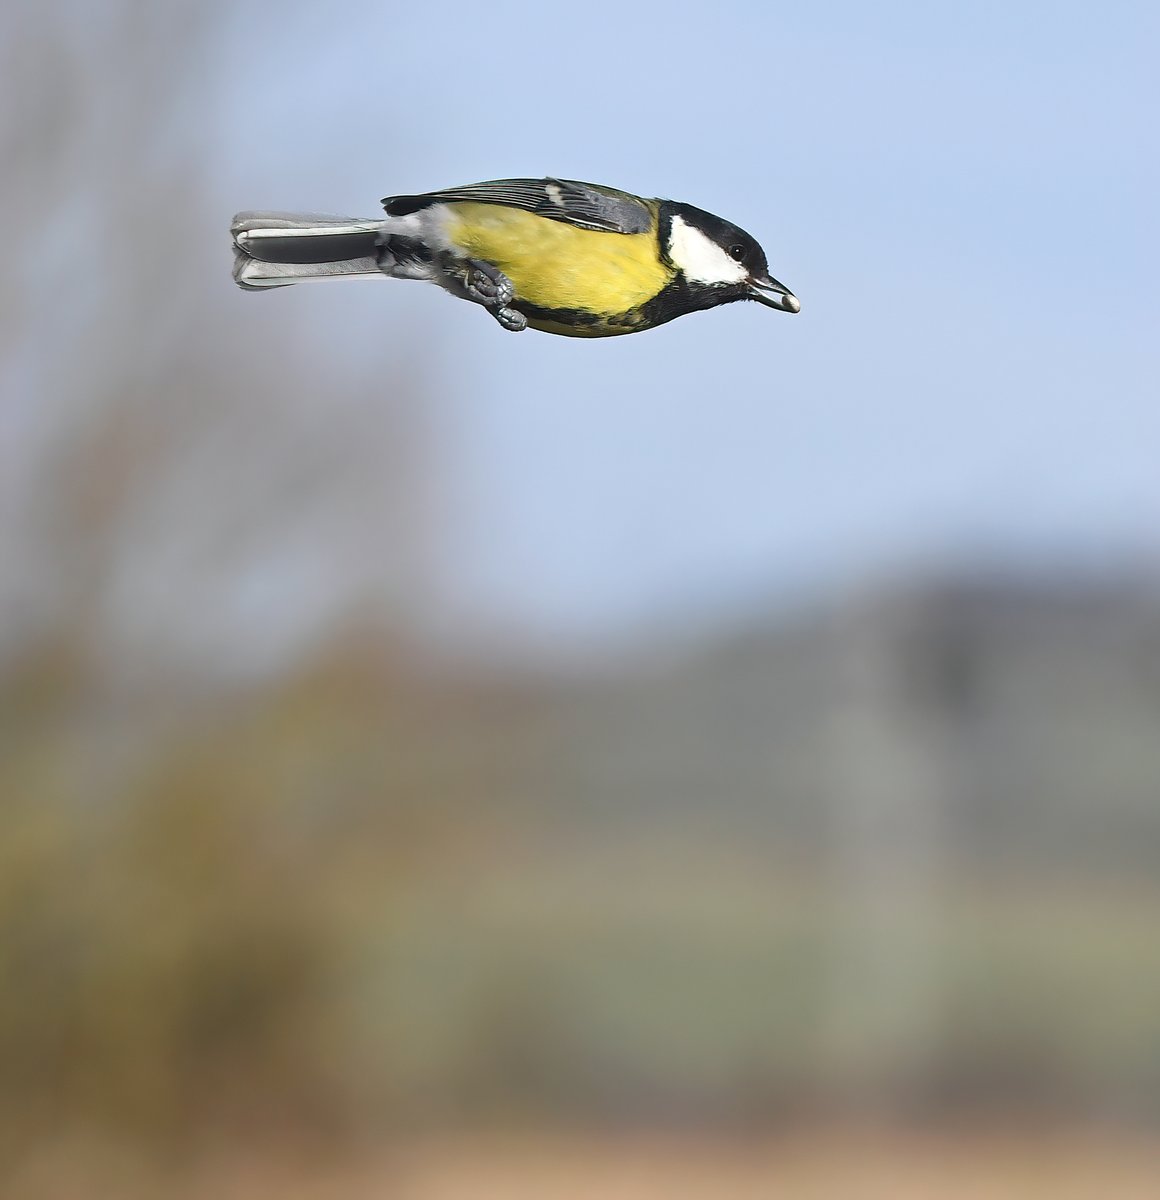 Lockdown is coming to an end, life can get back to as close to 'normal' as possible, but some things never change.... BIRD.LAUNCHED.AT.ME! AGAIN! At least this Great Tit brought me a present... 